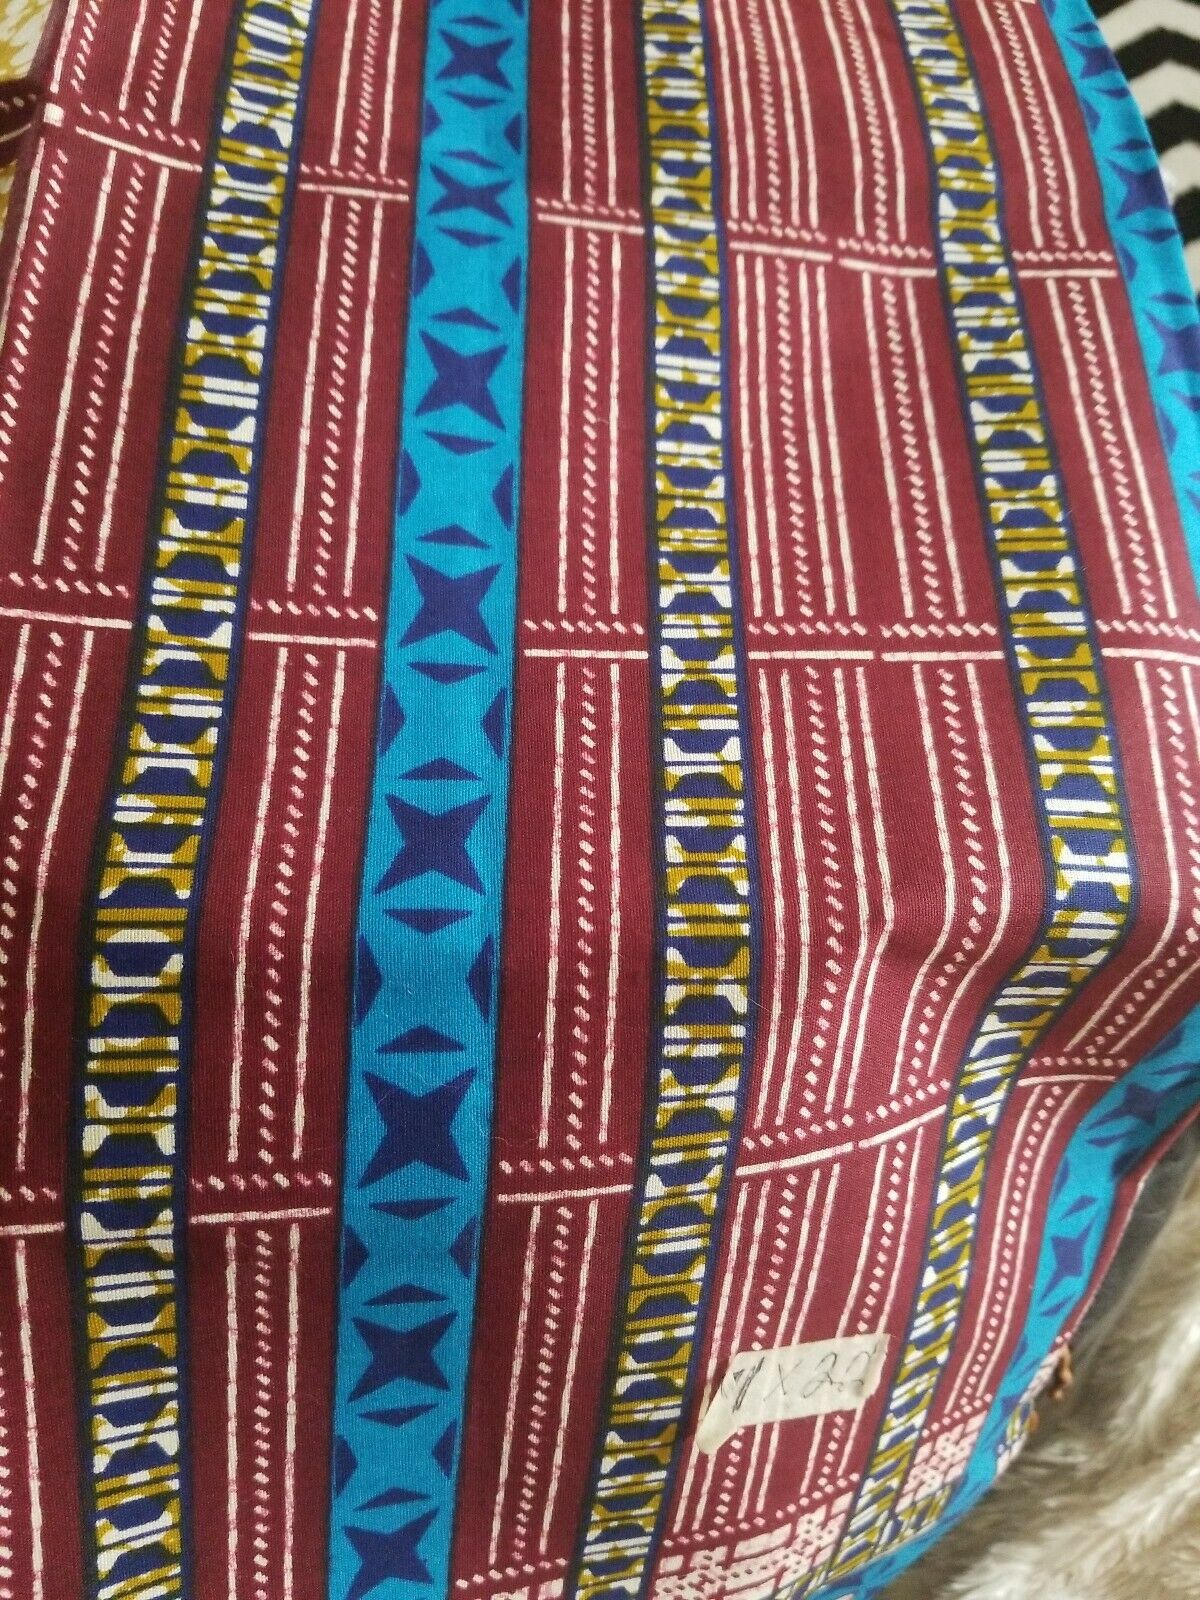 Blue MULTICOLOR African Wax Print 100% Cotton Fabric ~4yards×44" INCHES